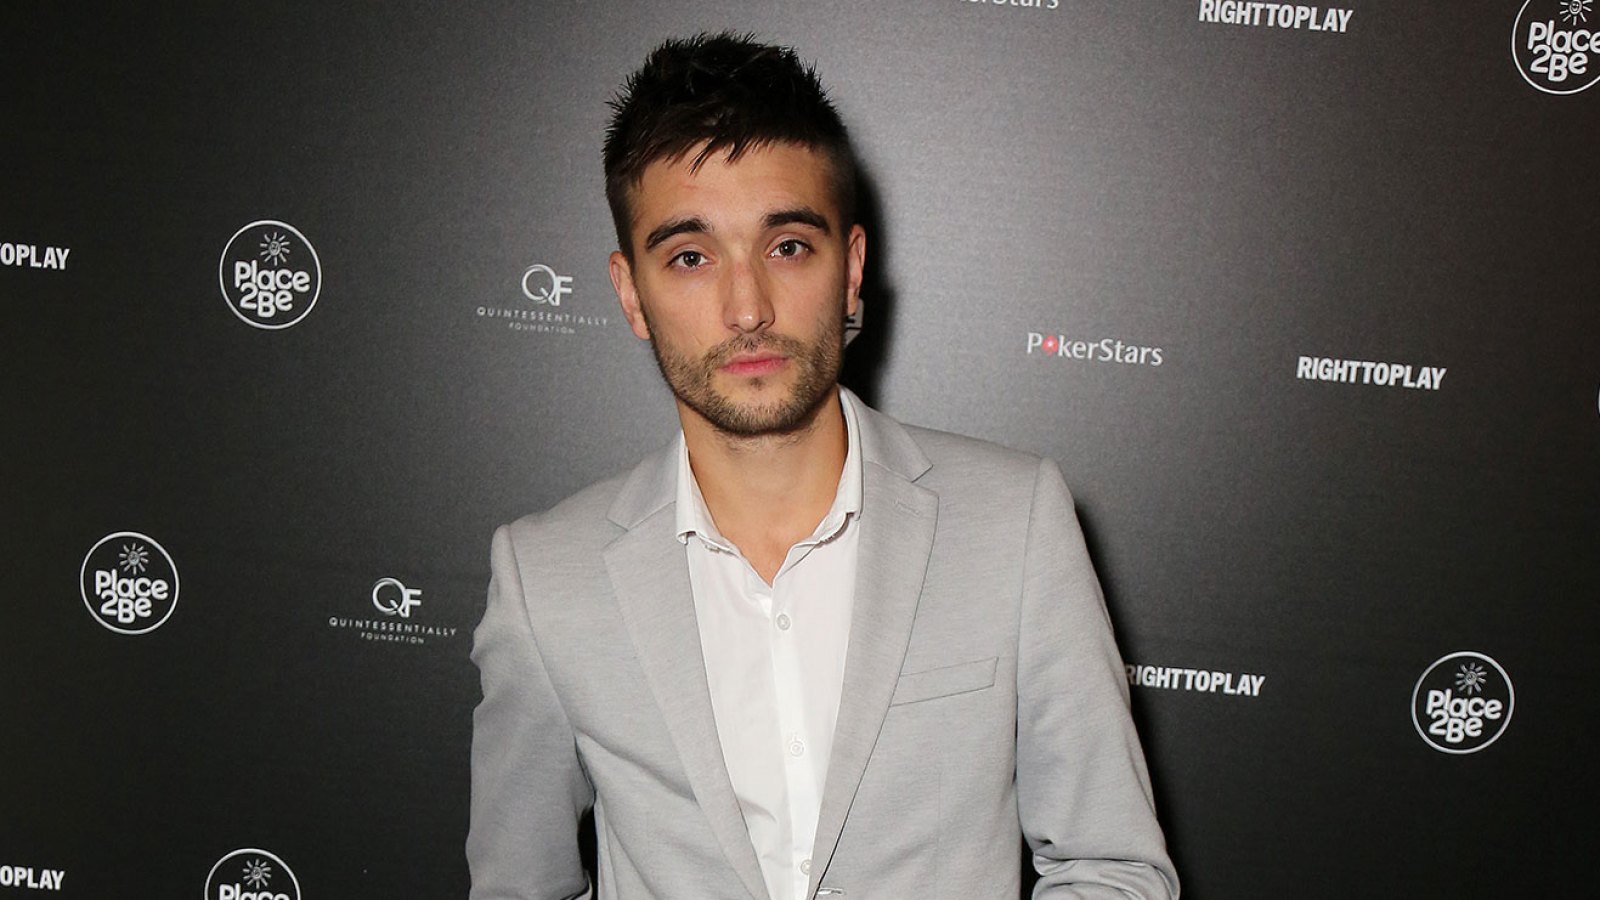 The Wanted’s Tom Parker Dead at 33 Following Treatment for Brain Tumor